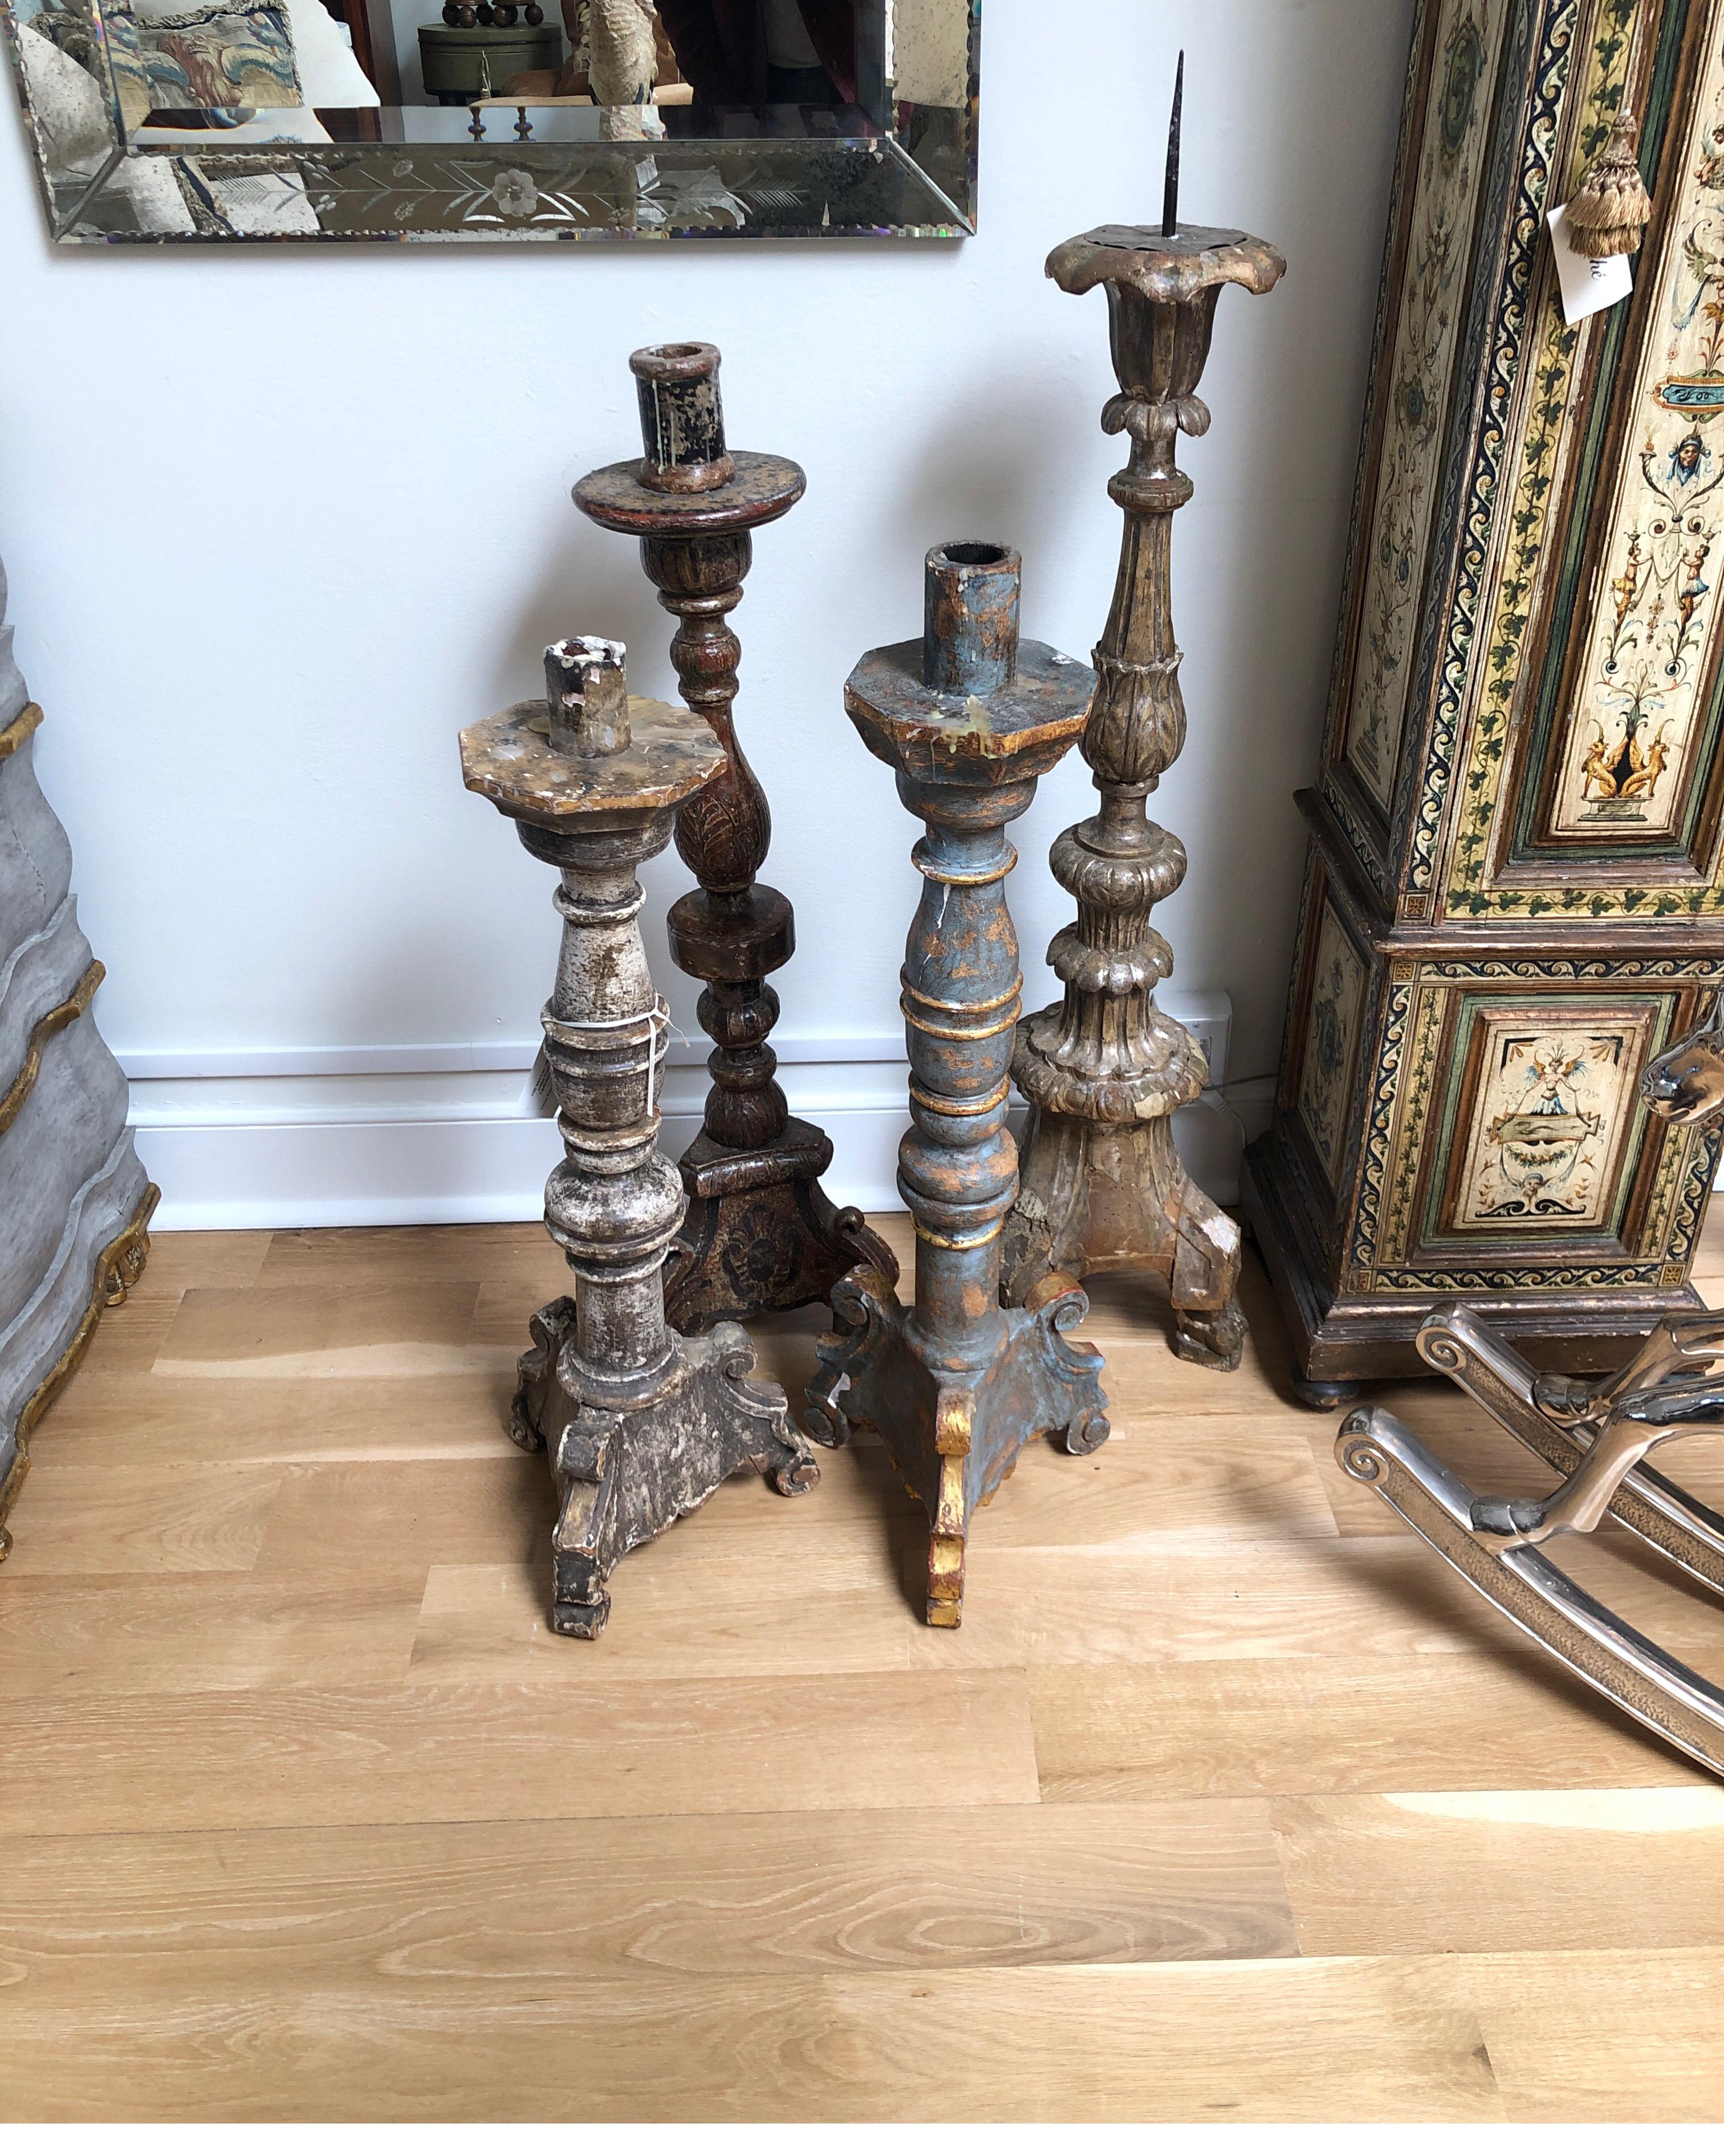 Grand 18th century painted Alter candlesticks/wood prickets. Beautiful patina in various colors and sizes.

Varying degrees of worming damage, etc. See images. 
Please confirm which piece you are interested in with offer. 

Sizes range from 32”